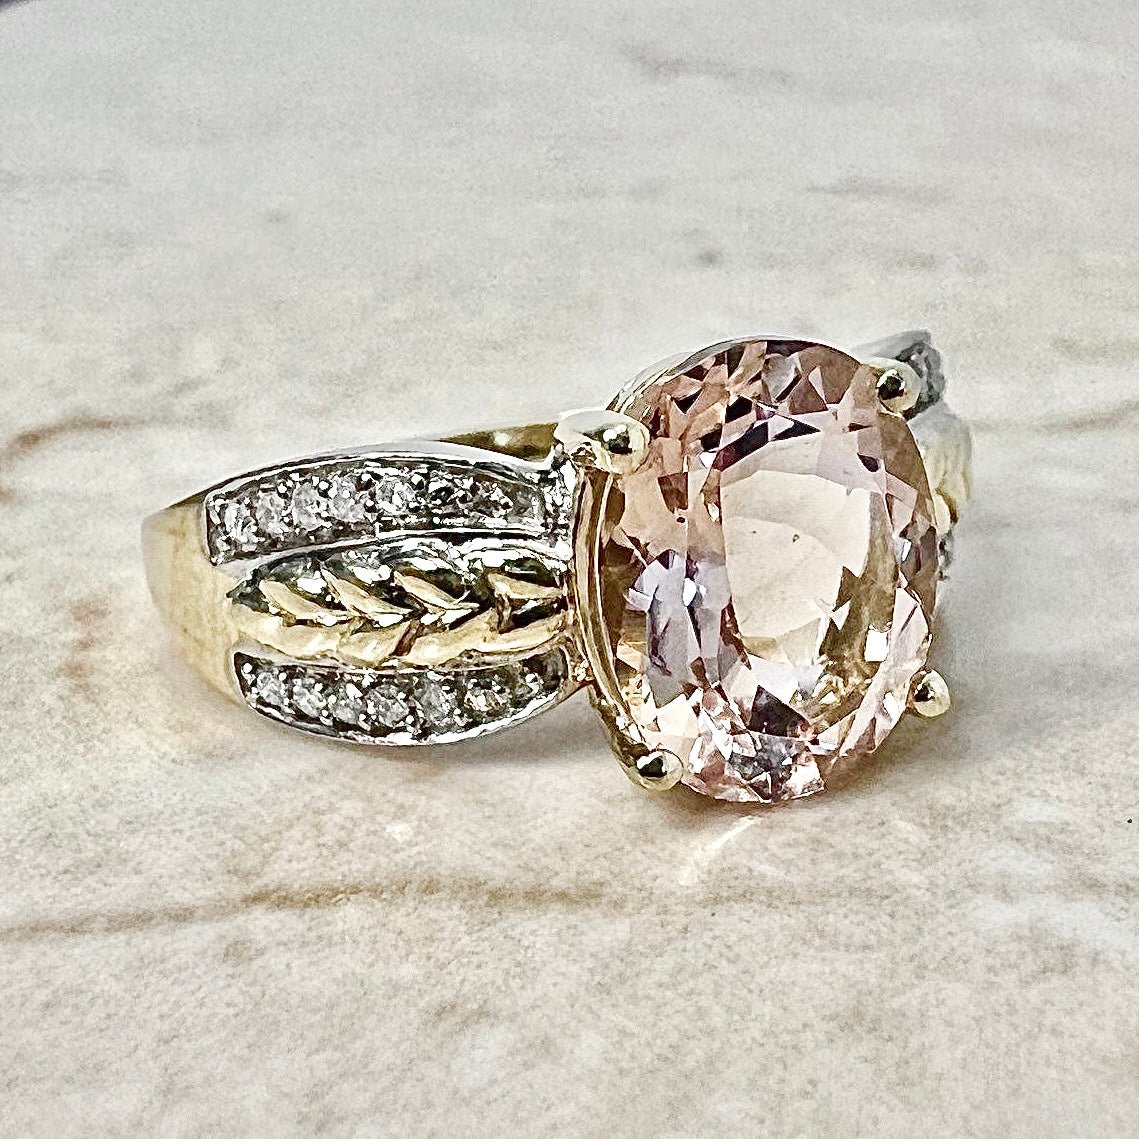 CLEARANCE 40% OFF - Vintage 14 Karat Yellow & White Gold 2 Carats Oval Morganite & Diamond Solitaire Ring